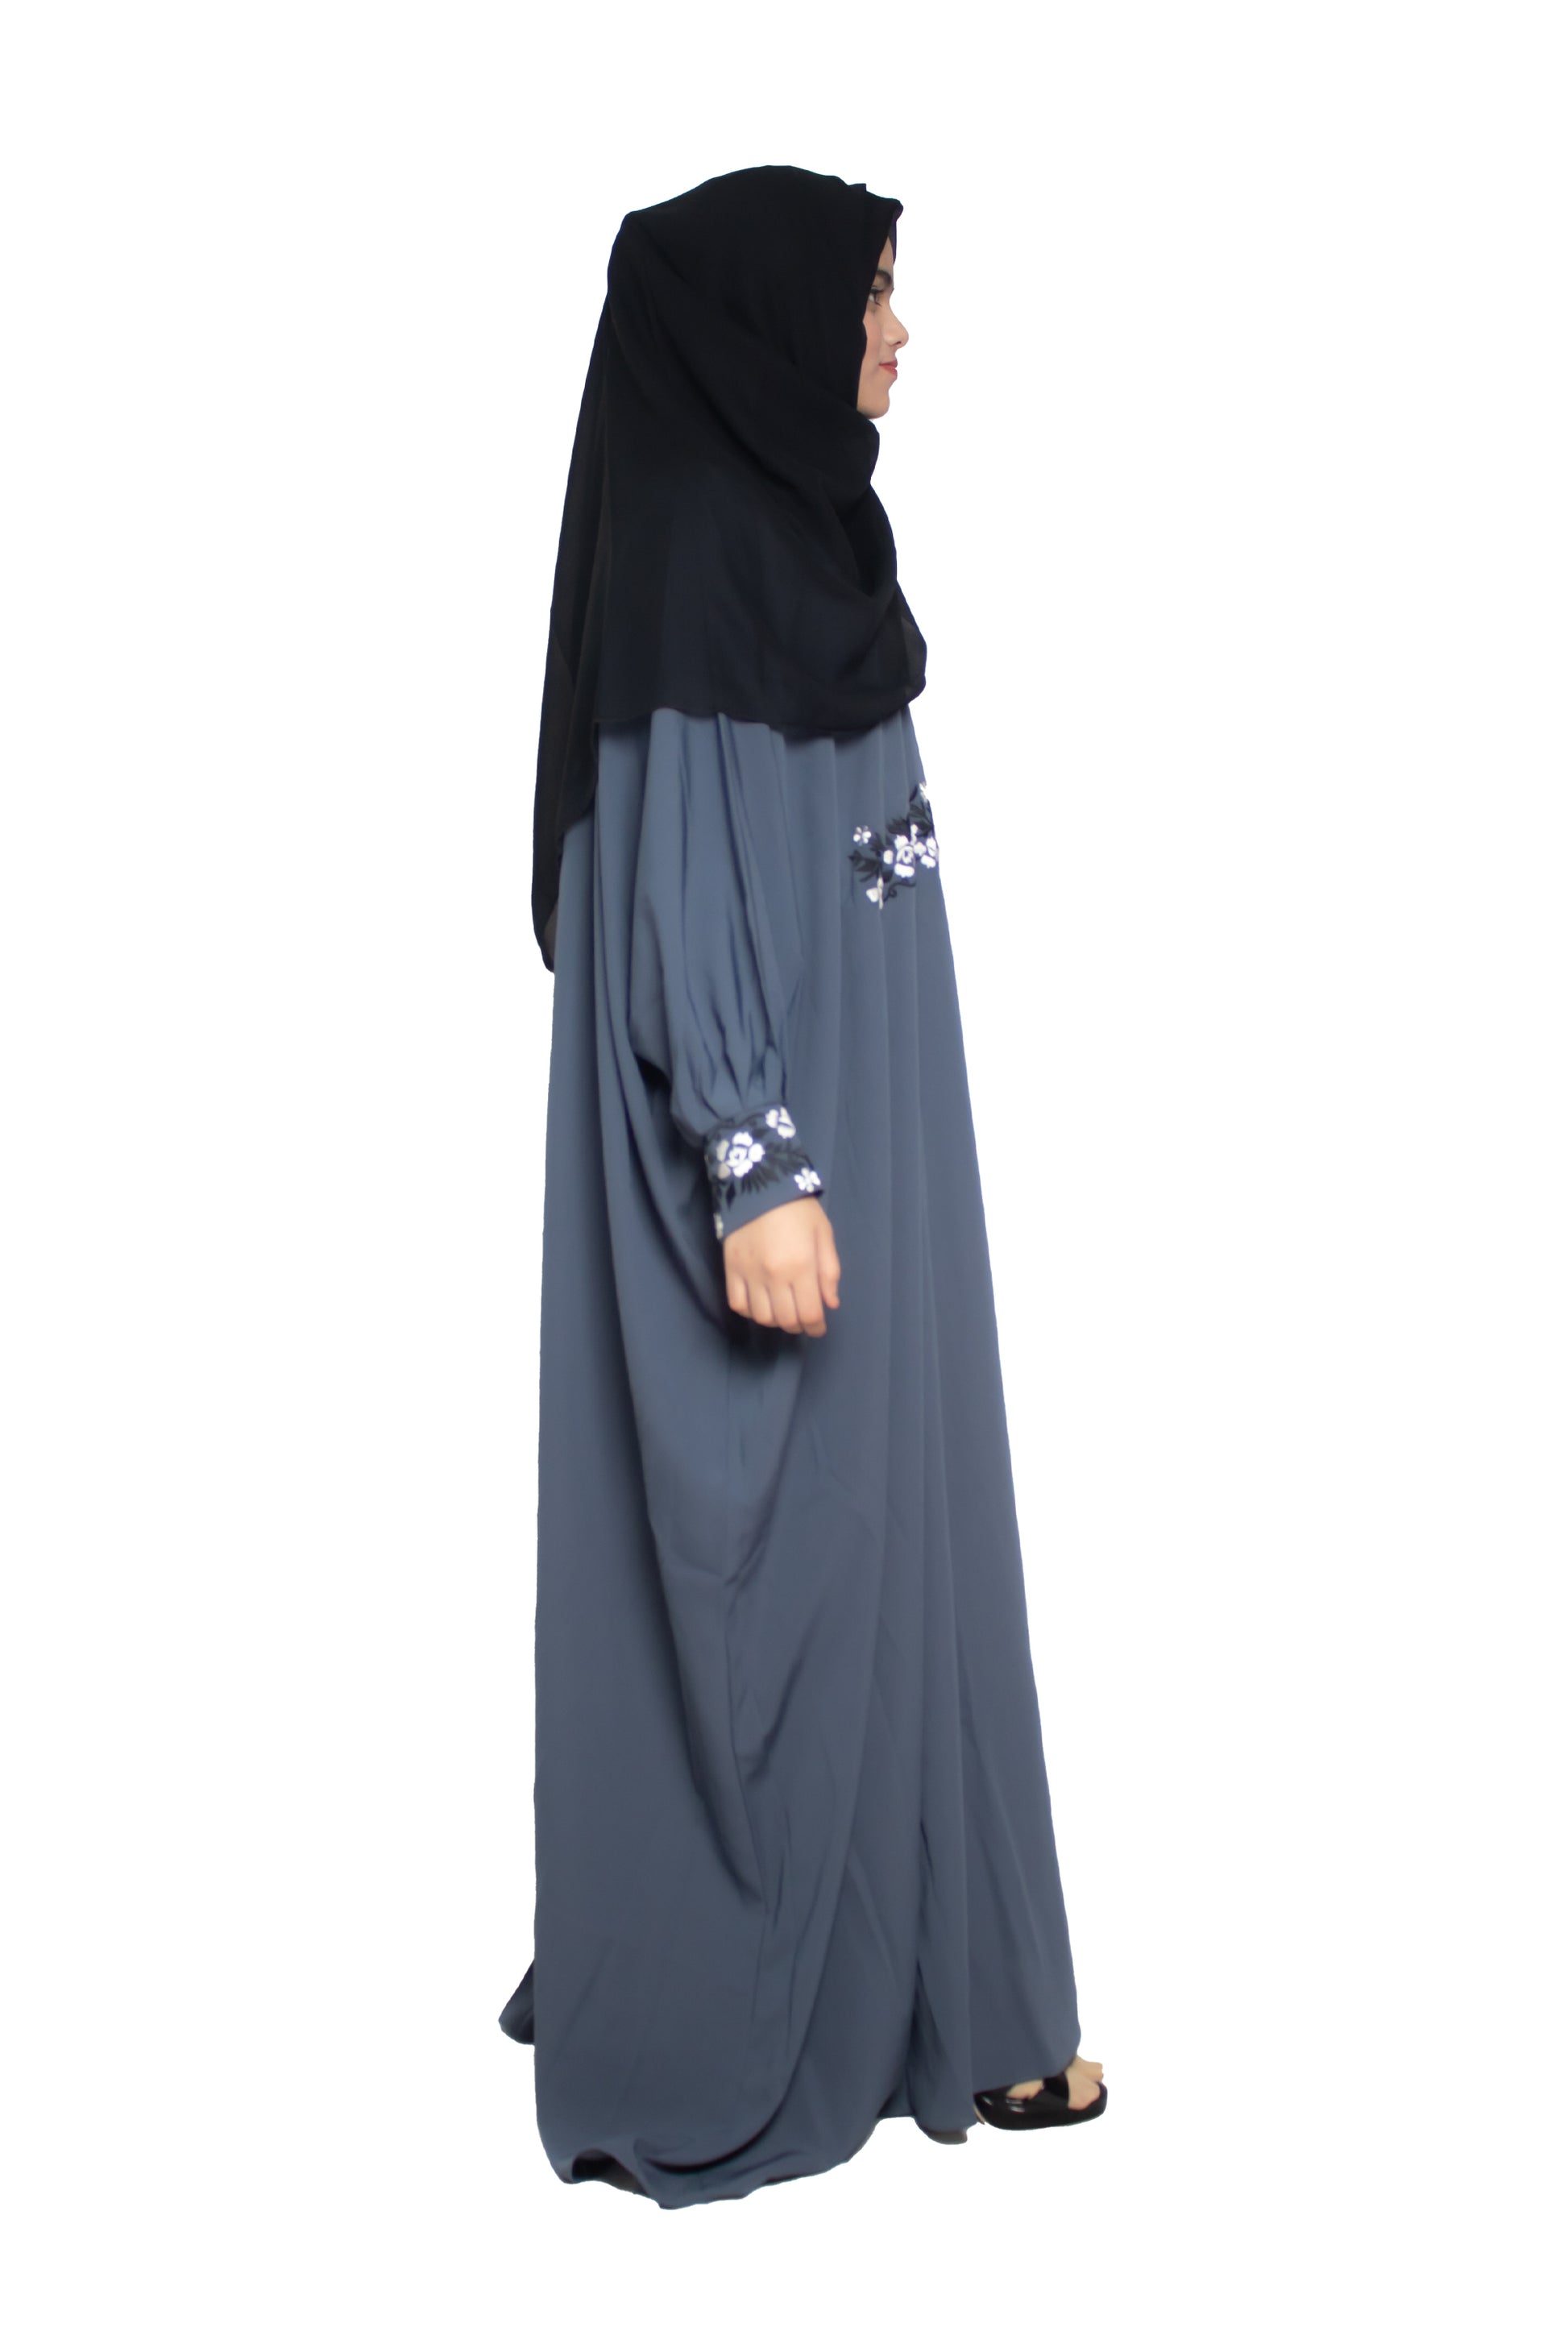 Modest City Self Design Blue Beighi Embroidery Crepe Abaya or Burqa With Hijab for Women & Girls-Series Laiba